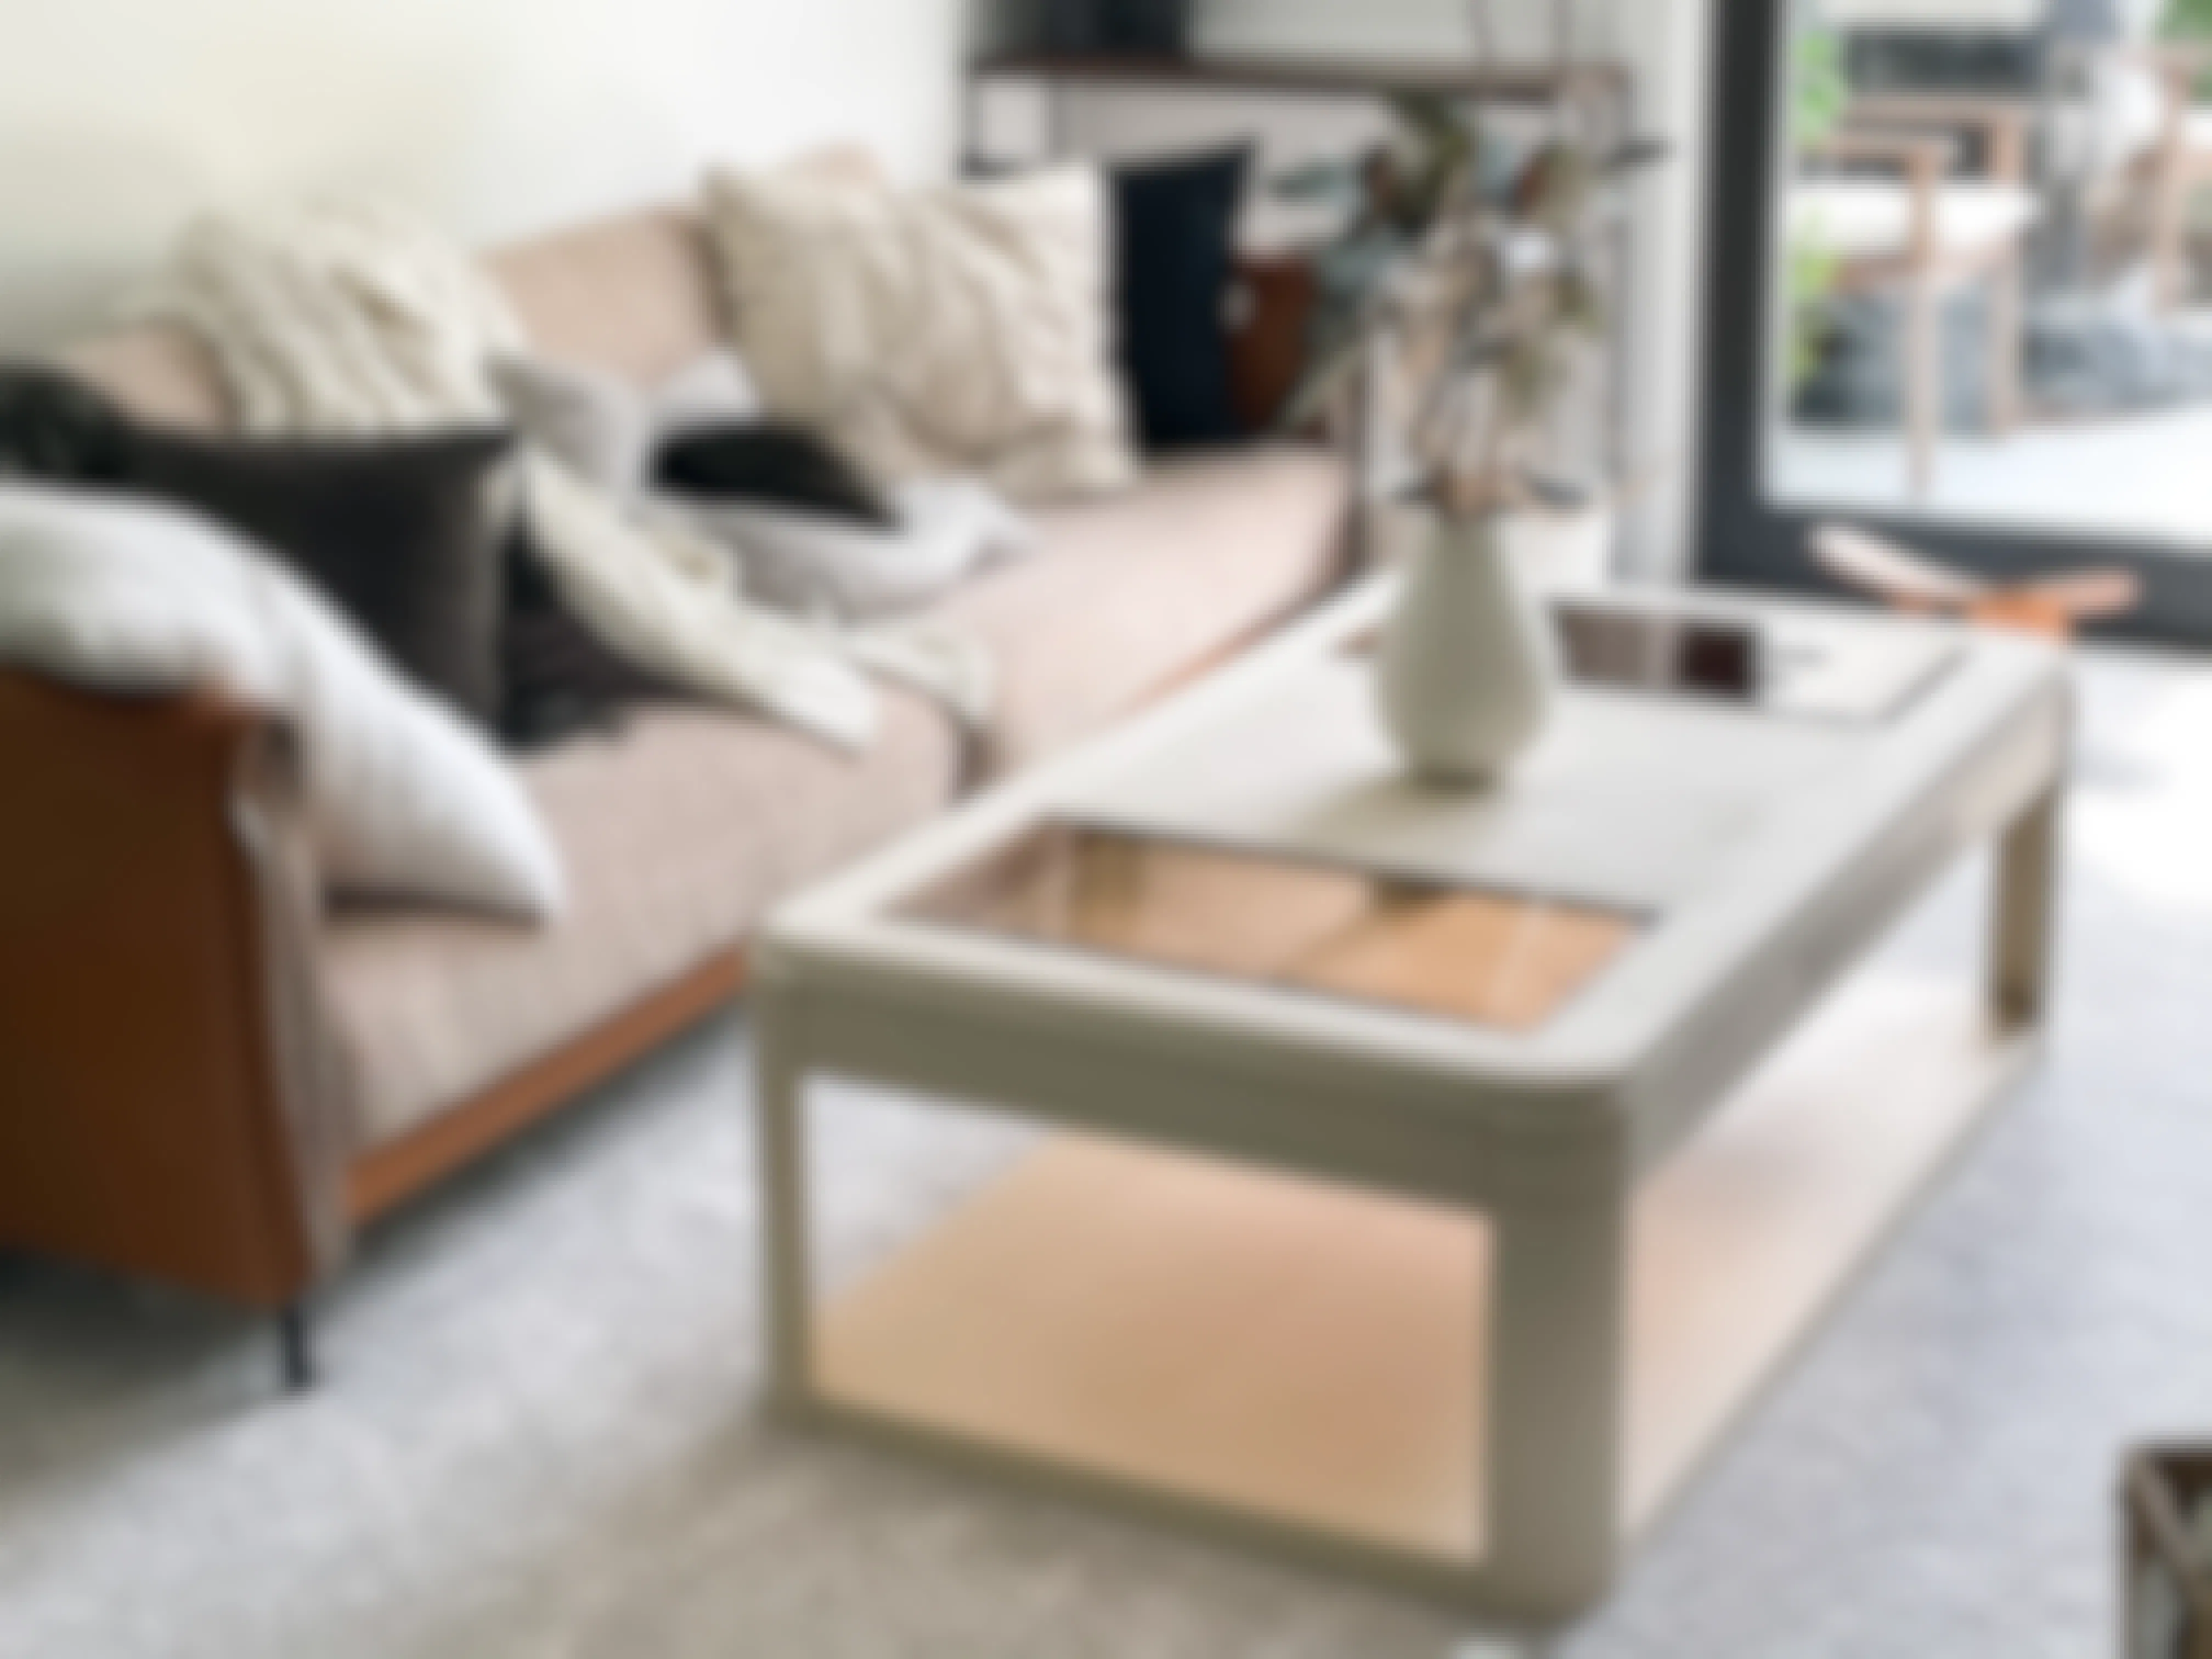 Coffee table and living room furniture